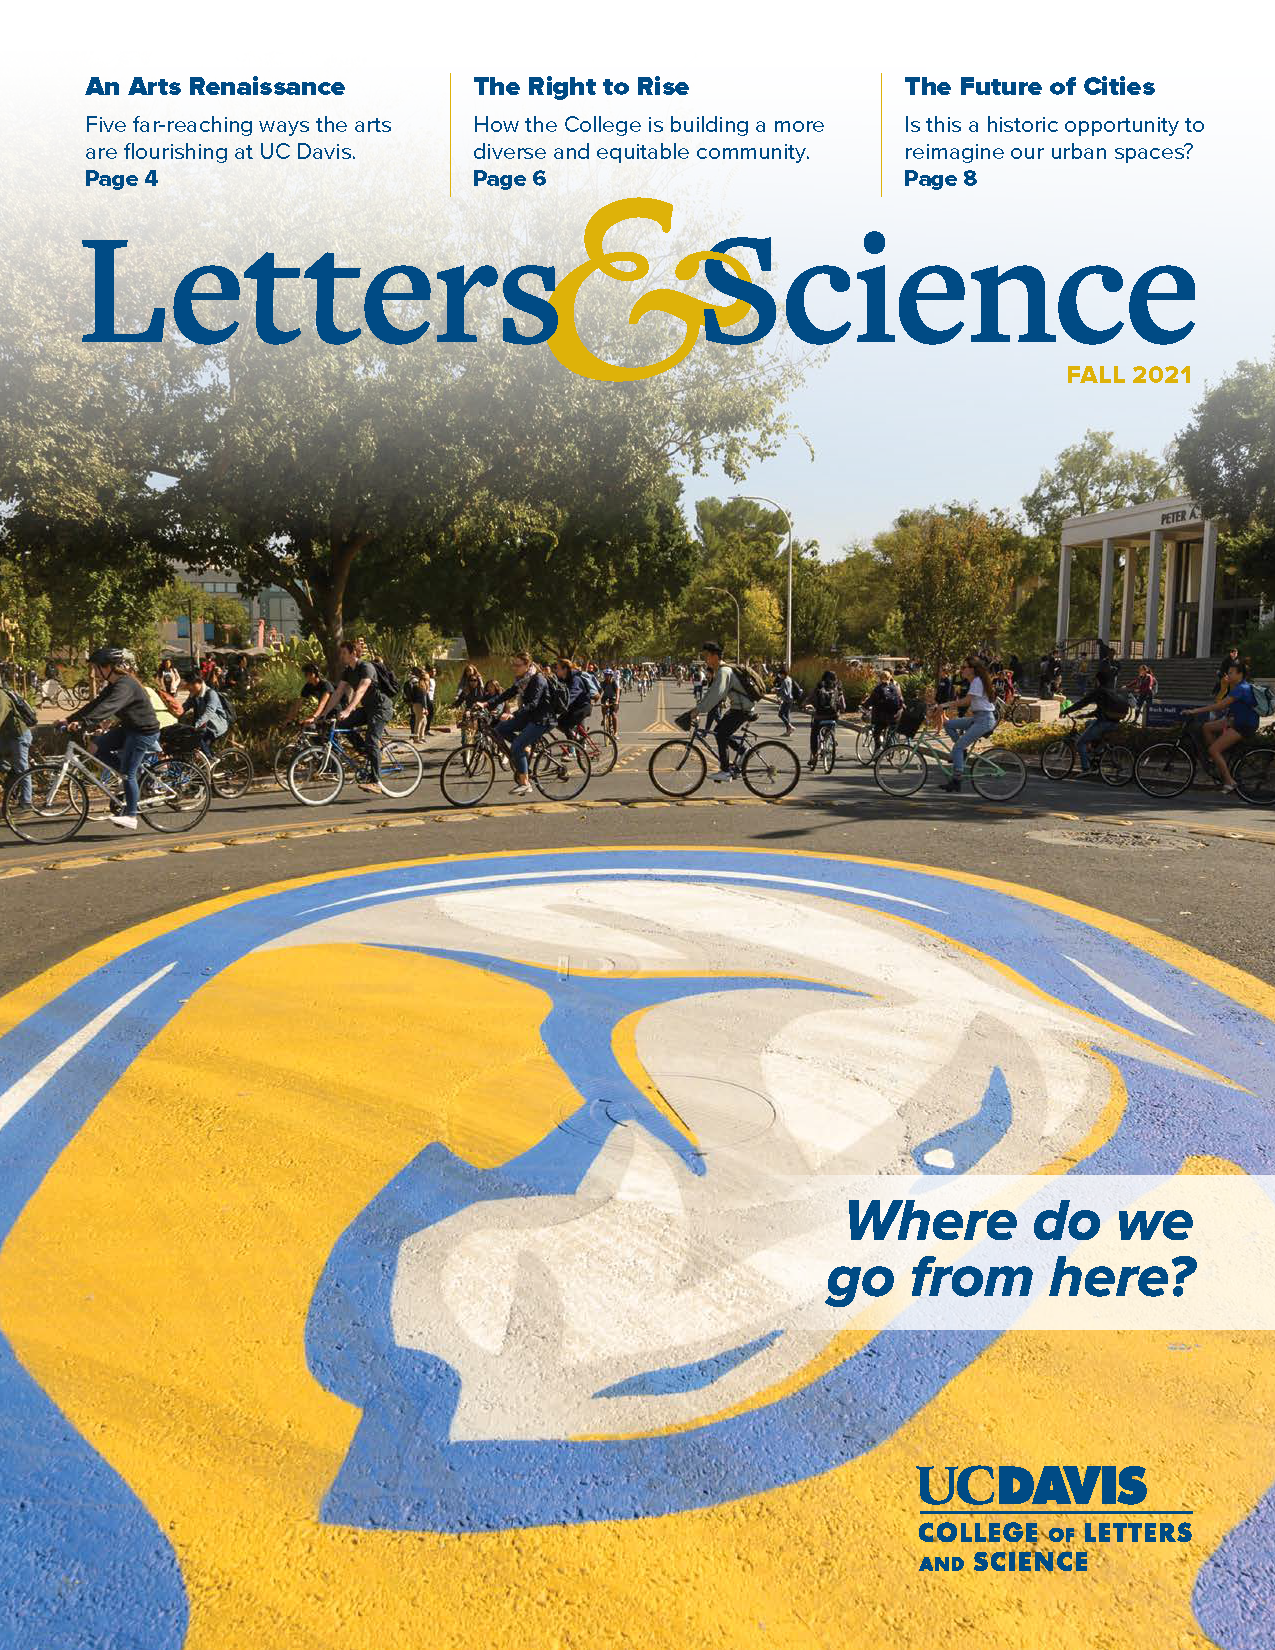 Magazine cover with photo of bicycle riders pedaling around a UC Davis traffic circle with the Gunrock mascot painted in the middle